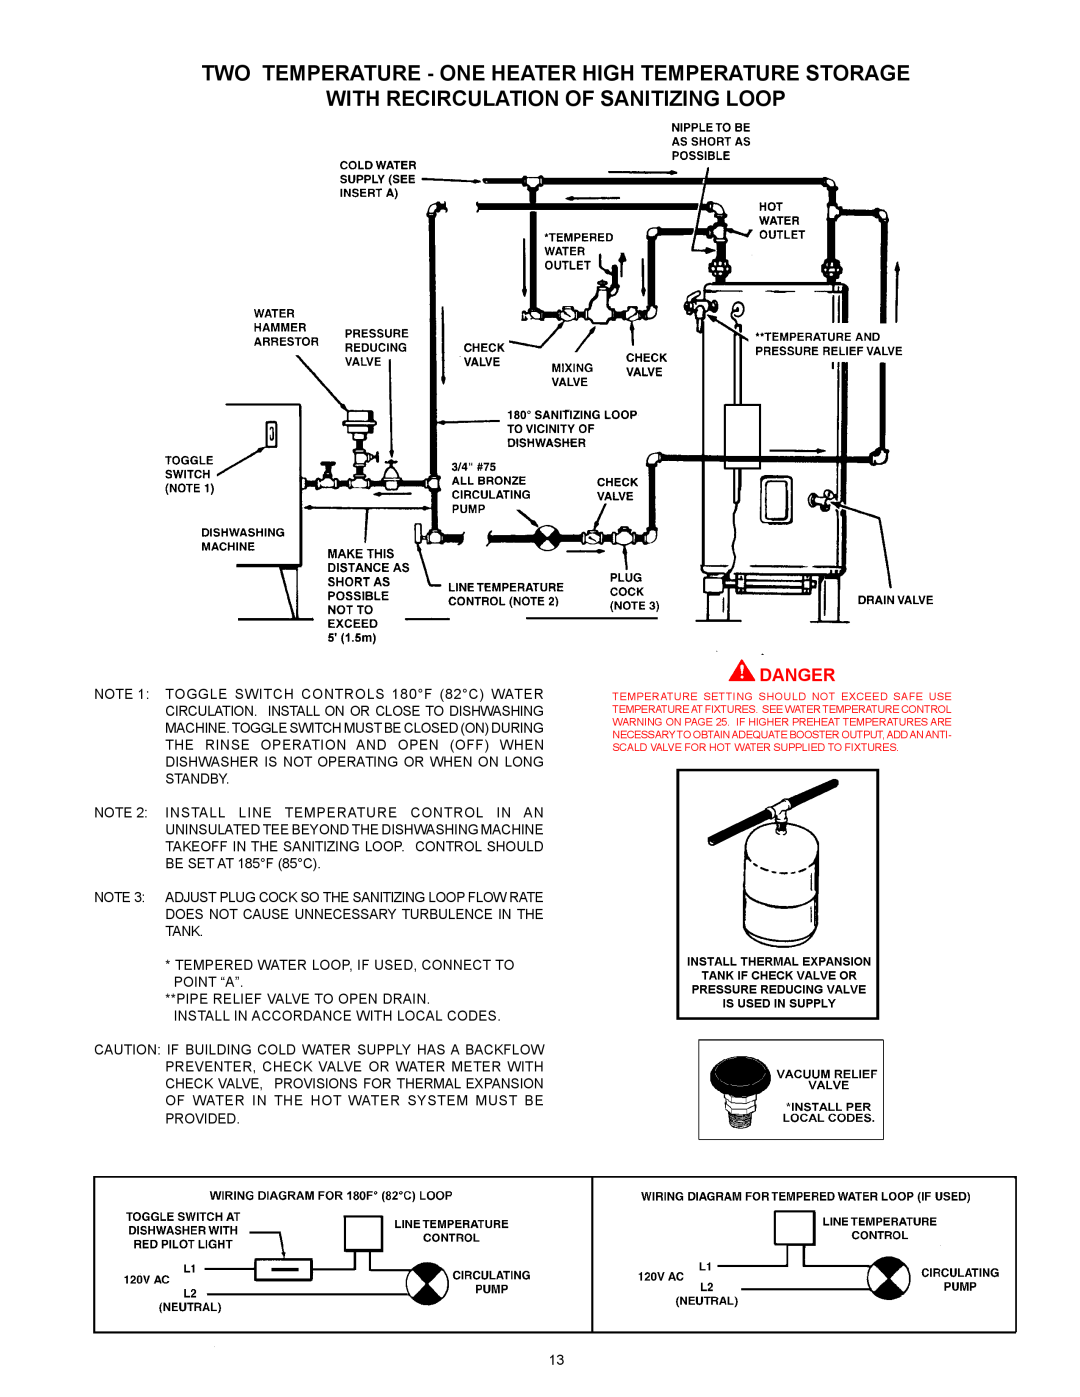 American Water Heater BCG3-100T250-6NOX, BCG3-80T150-6NOX Two Temperature - One Heater High Temperature Storage, Danger 